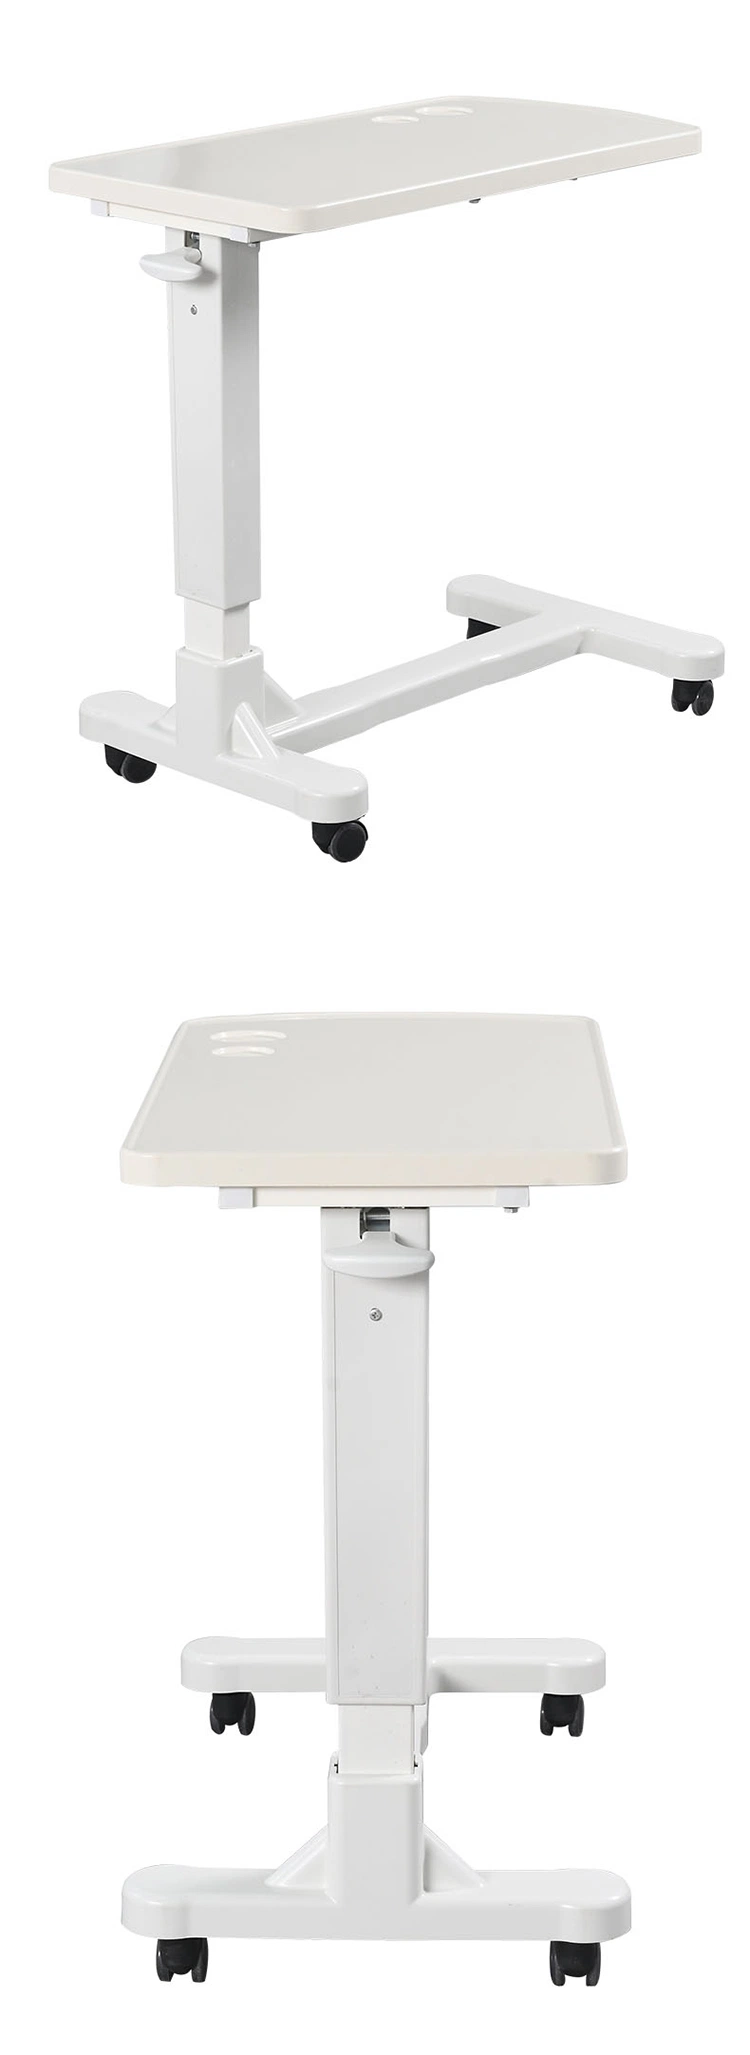 High Quality Movable ABS Height Adjustable Folding Patient Hospital Overbed Table